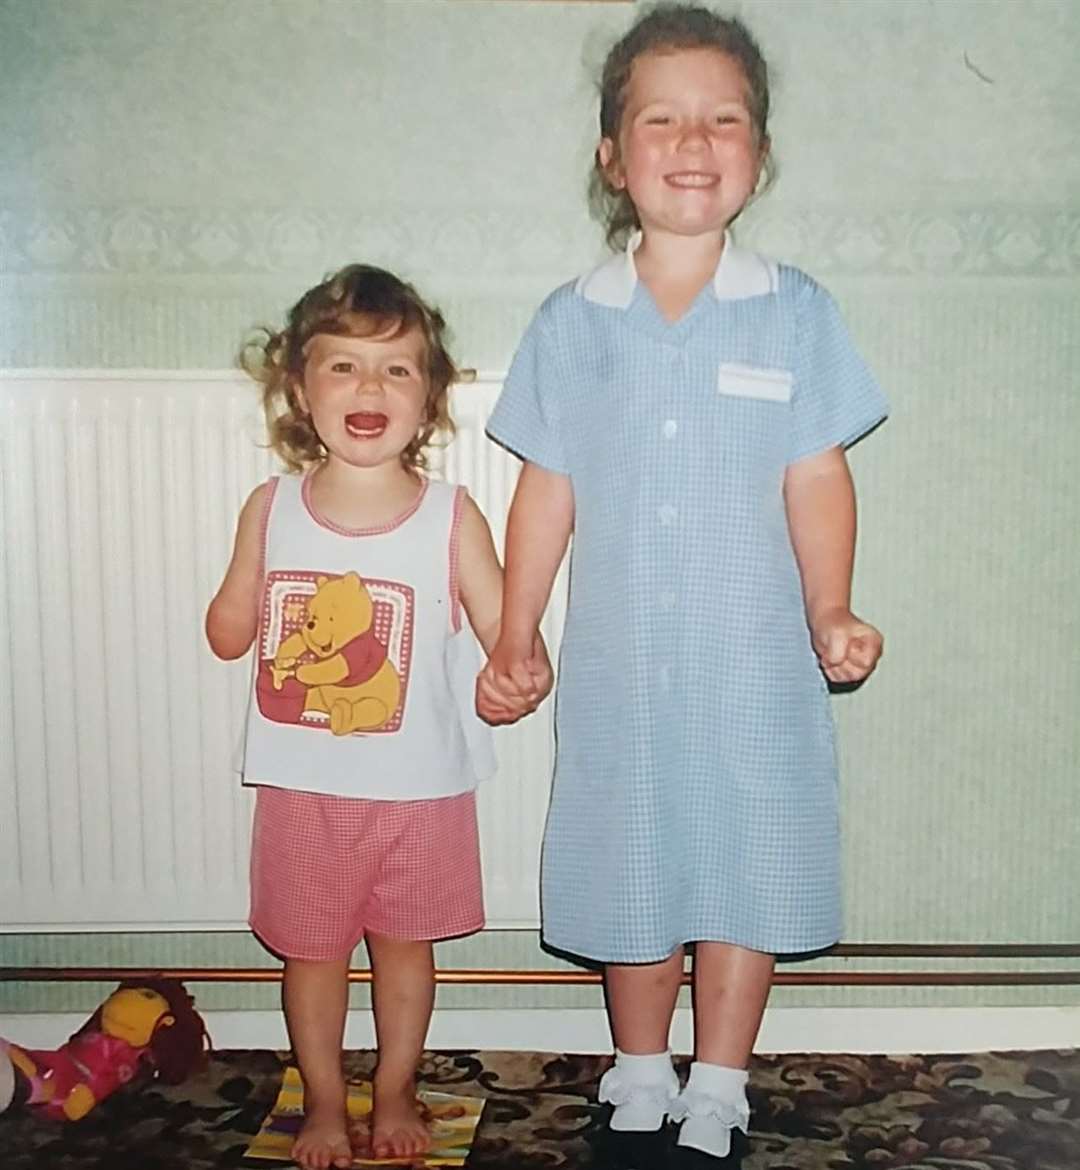 Abi with her older sister Tia as a child